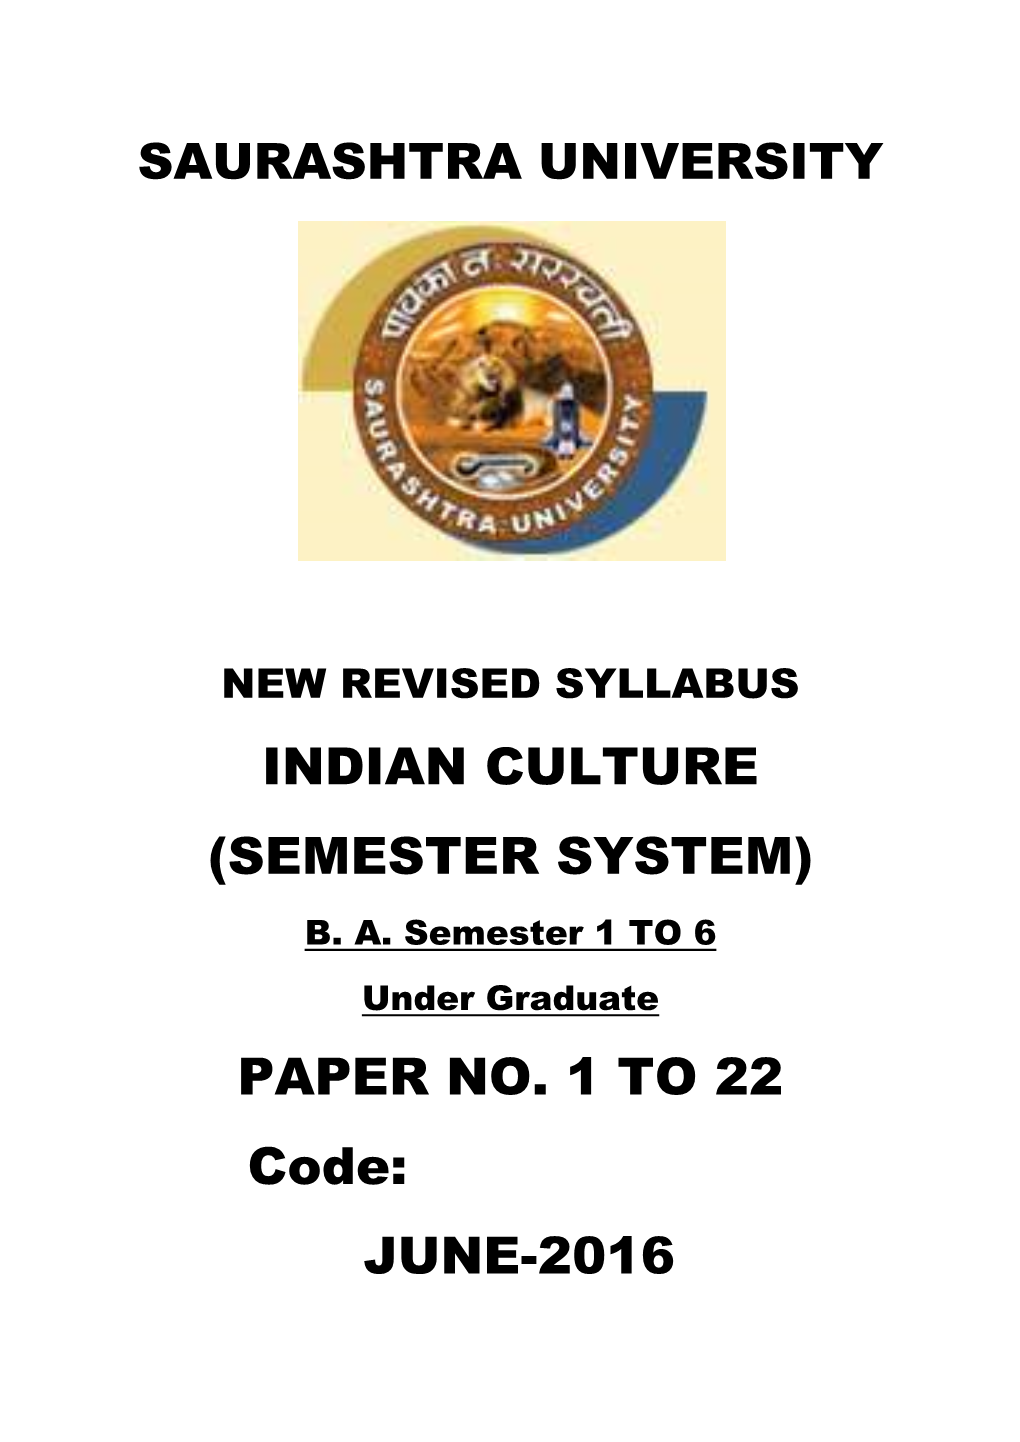 INDIAN CULTURE (SEMESTER SYSTEM) PAPER NO. 1 to 22 Code